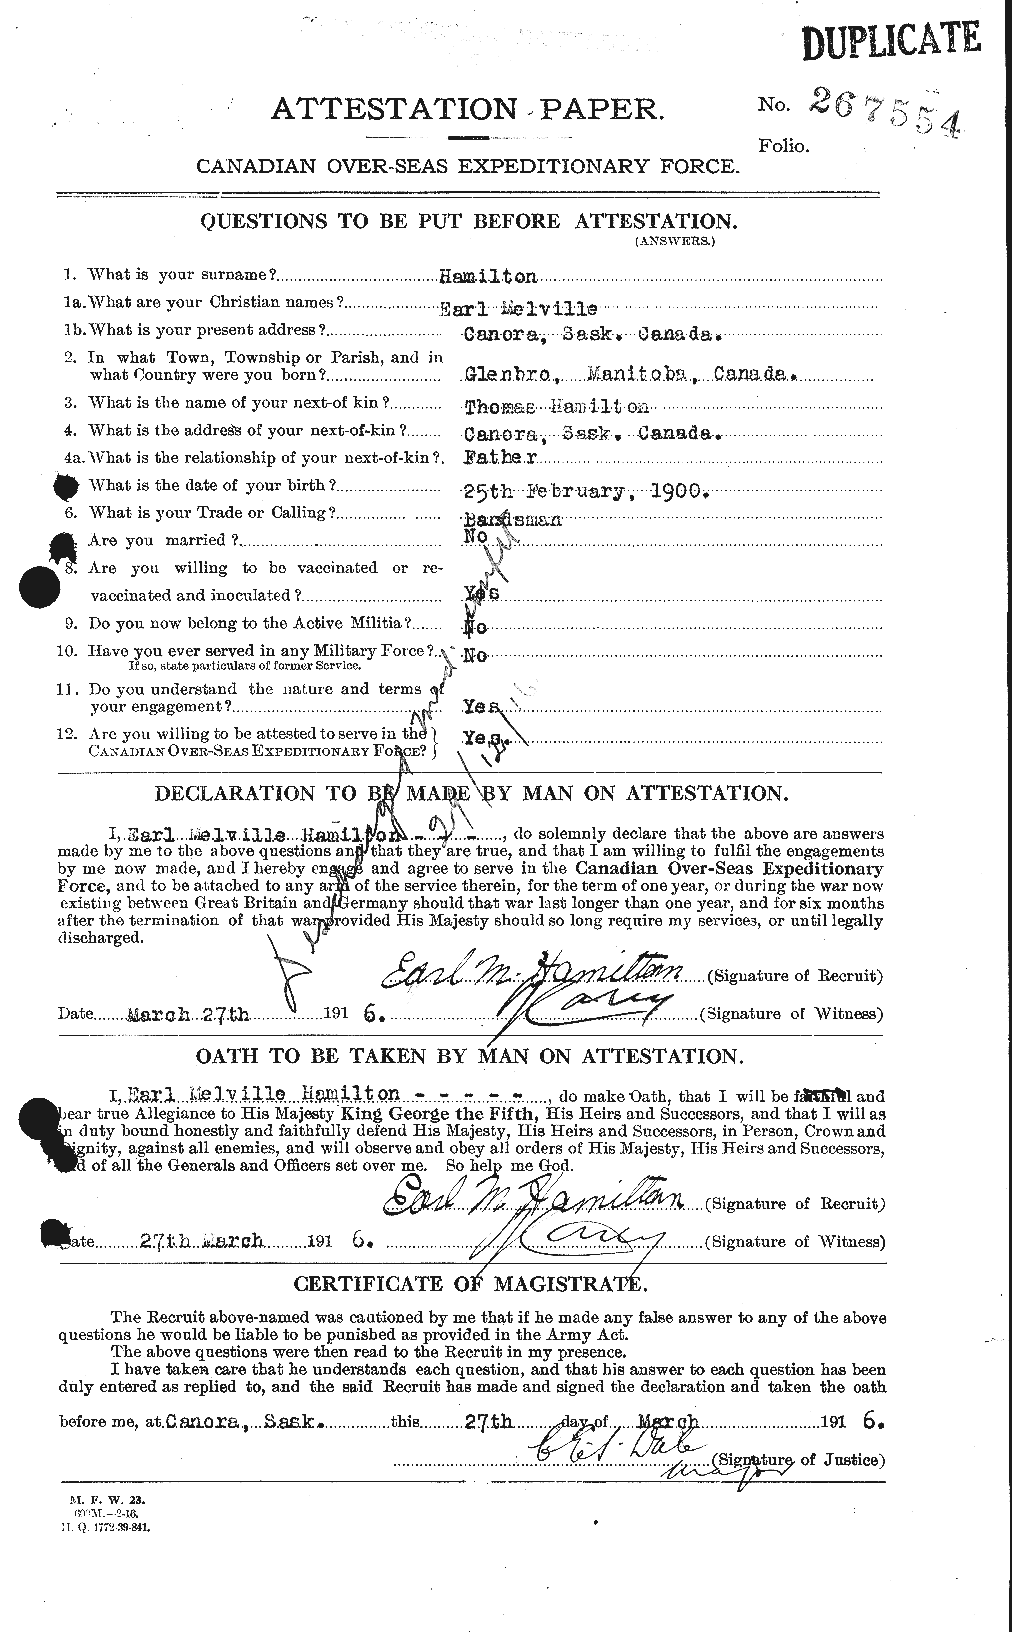 Personnel Records of the First World War - CEF 375369a